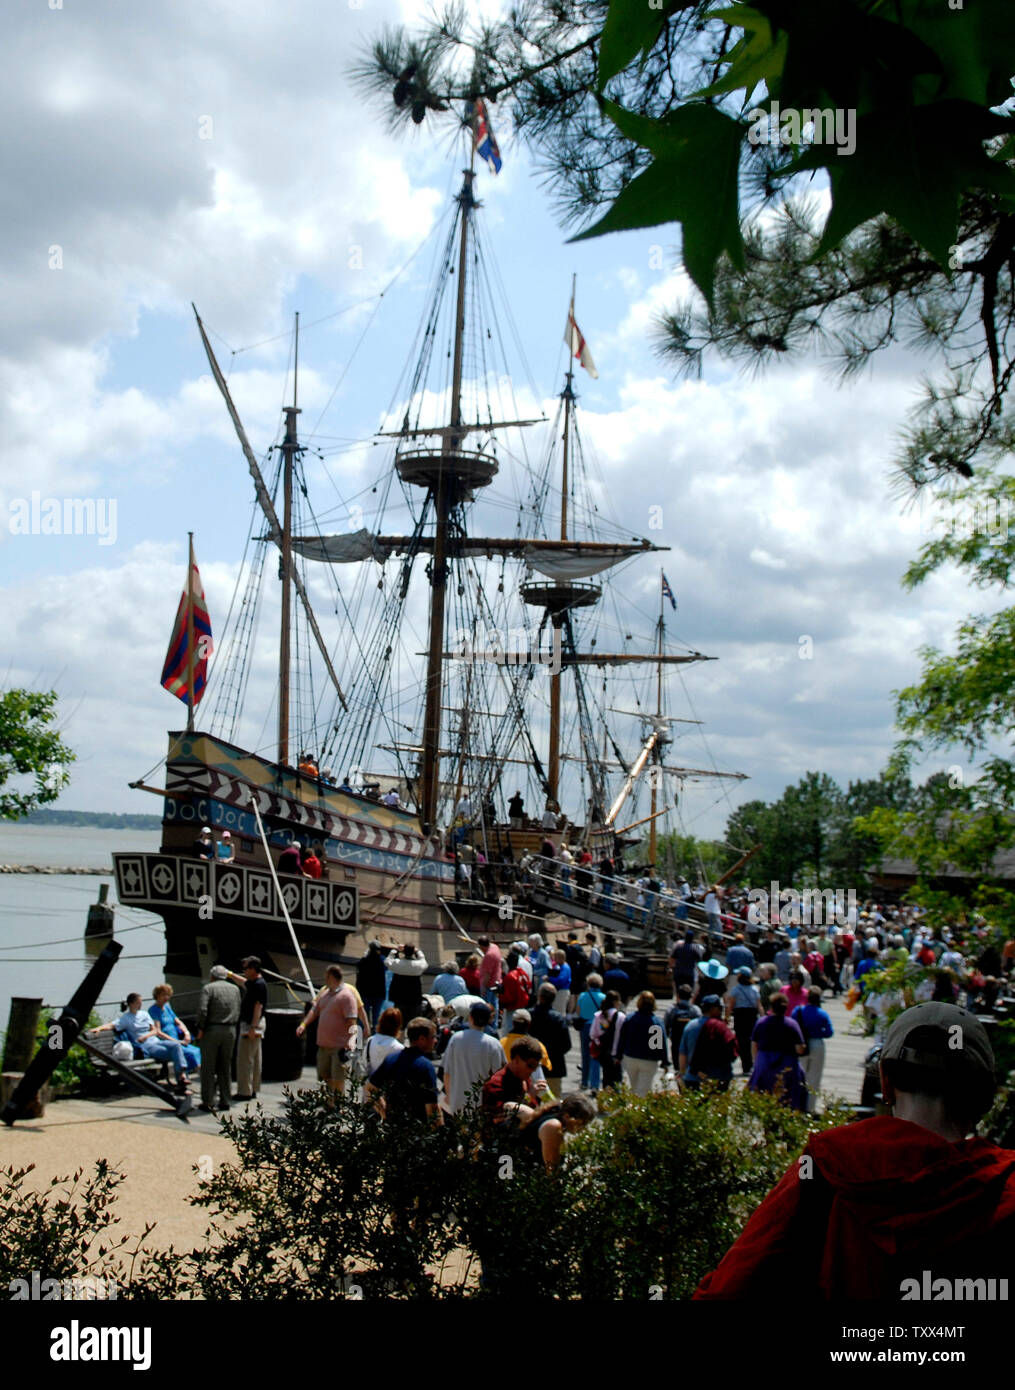 Visitors tour a replica of the Susan Constant, one of three ships that brought settlers to the Jamestown settlement, during the 400th anniversary weekend, in Jamestown, Virginia on May 13, 2007. (UPI Photo/Kevin Dietsch) Stock Photo